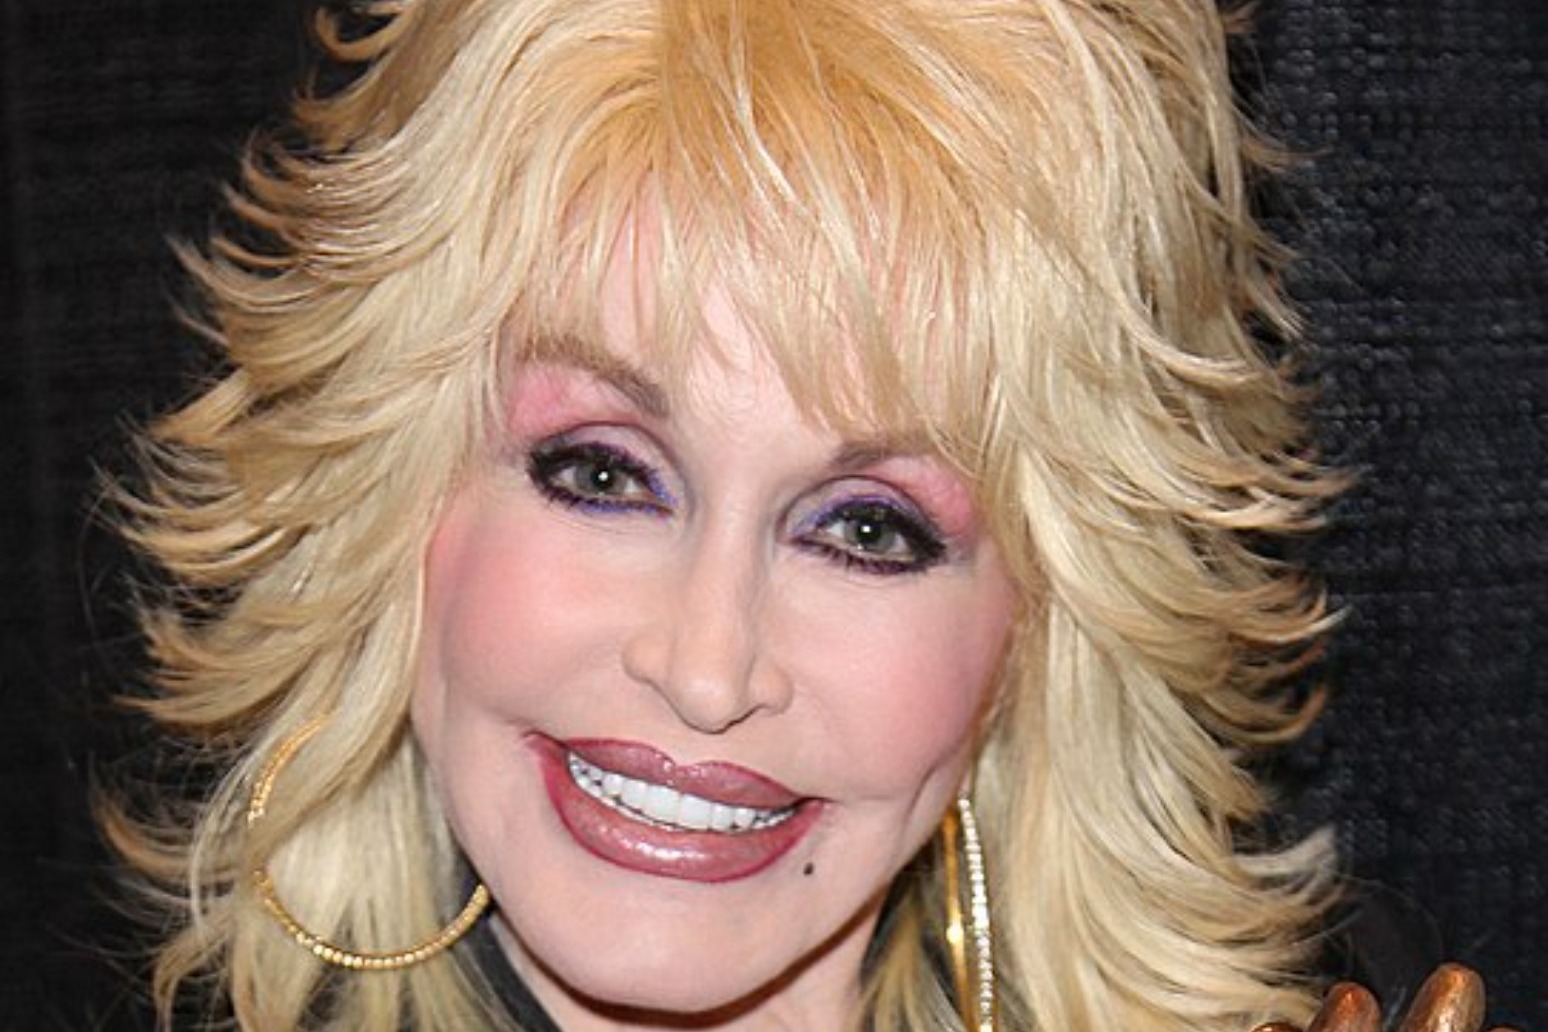 Dolly Parton inducted into Rock and Roll Hall of Fame despite initial resistance 